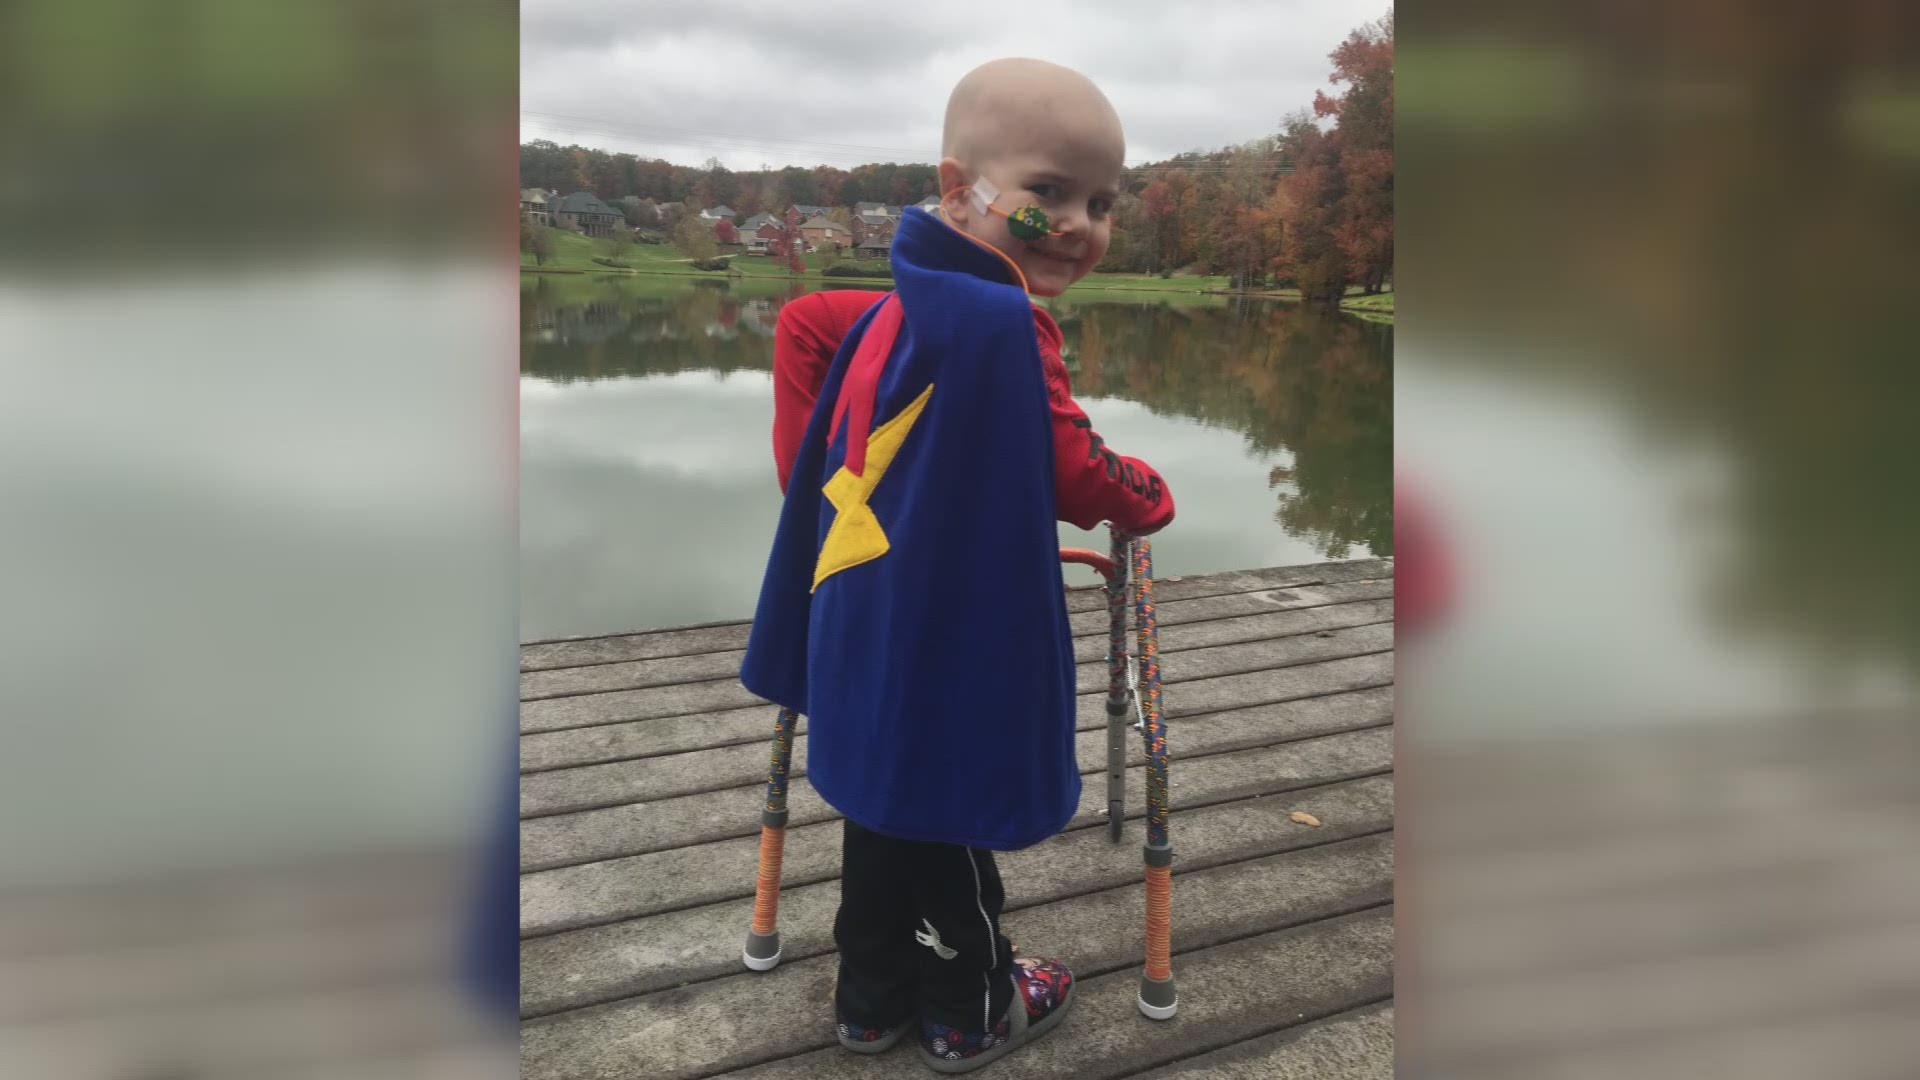 4-year-old Noah Sileno is a fighter, but he can't stand hospital gowns because he has bad nueropathy. That didn't seem right, so one woman started the Noah Nation Foundation to create medically adapted pajamas for patients at ETCH.